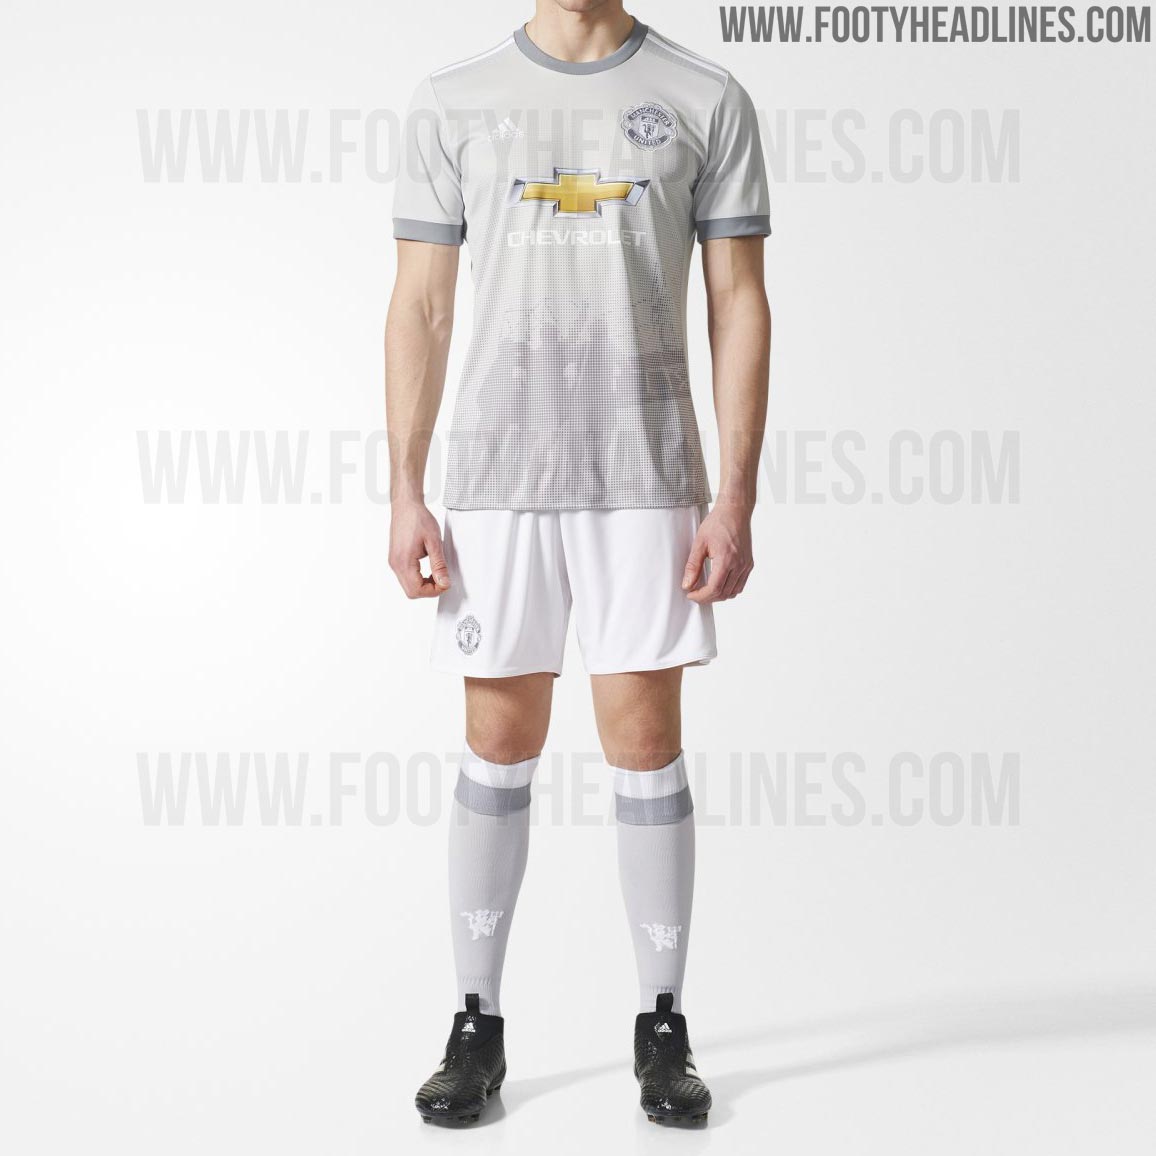 Manchester United 17 18 Third Kit Released Footy Headlines